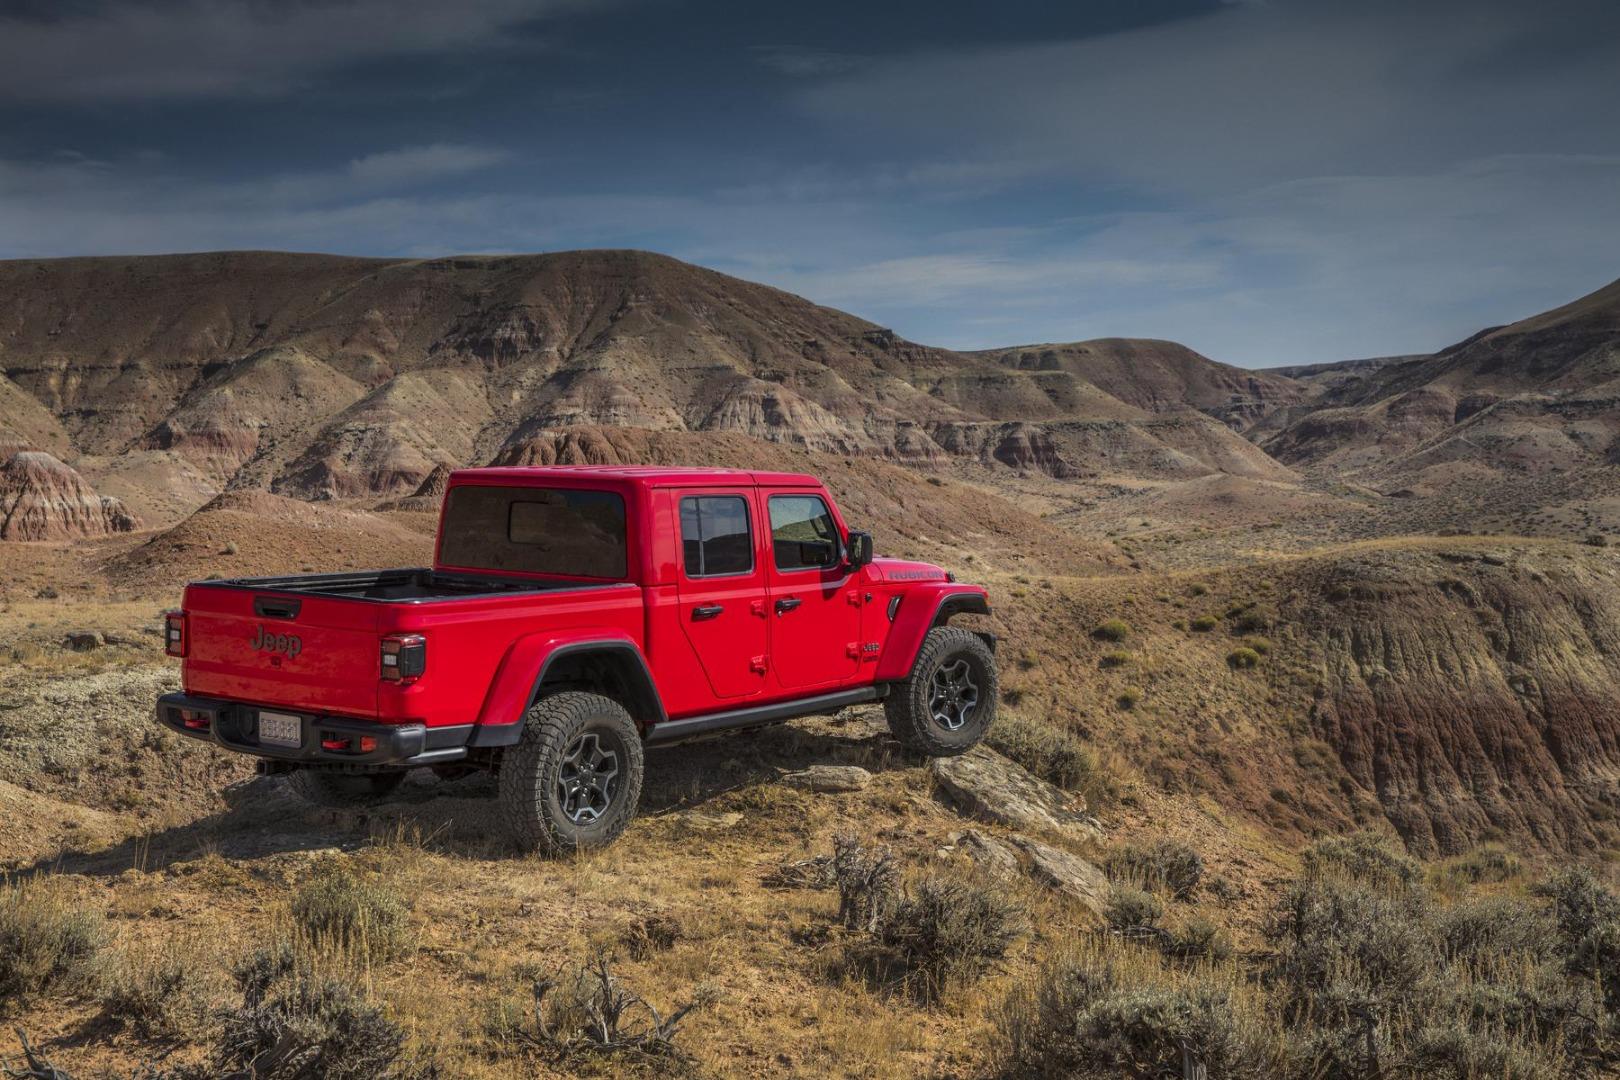 can you fit 3 cars seats in the back of a jeep gladiator?